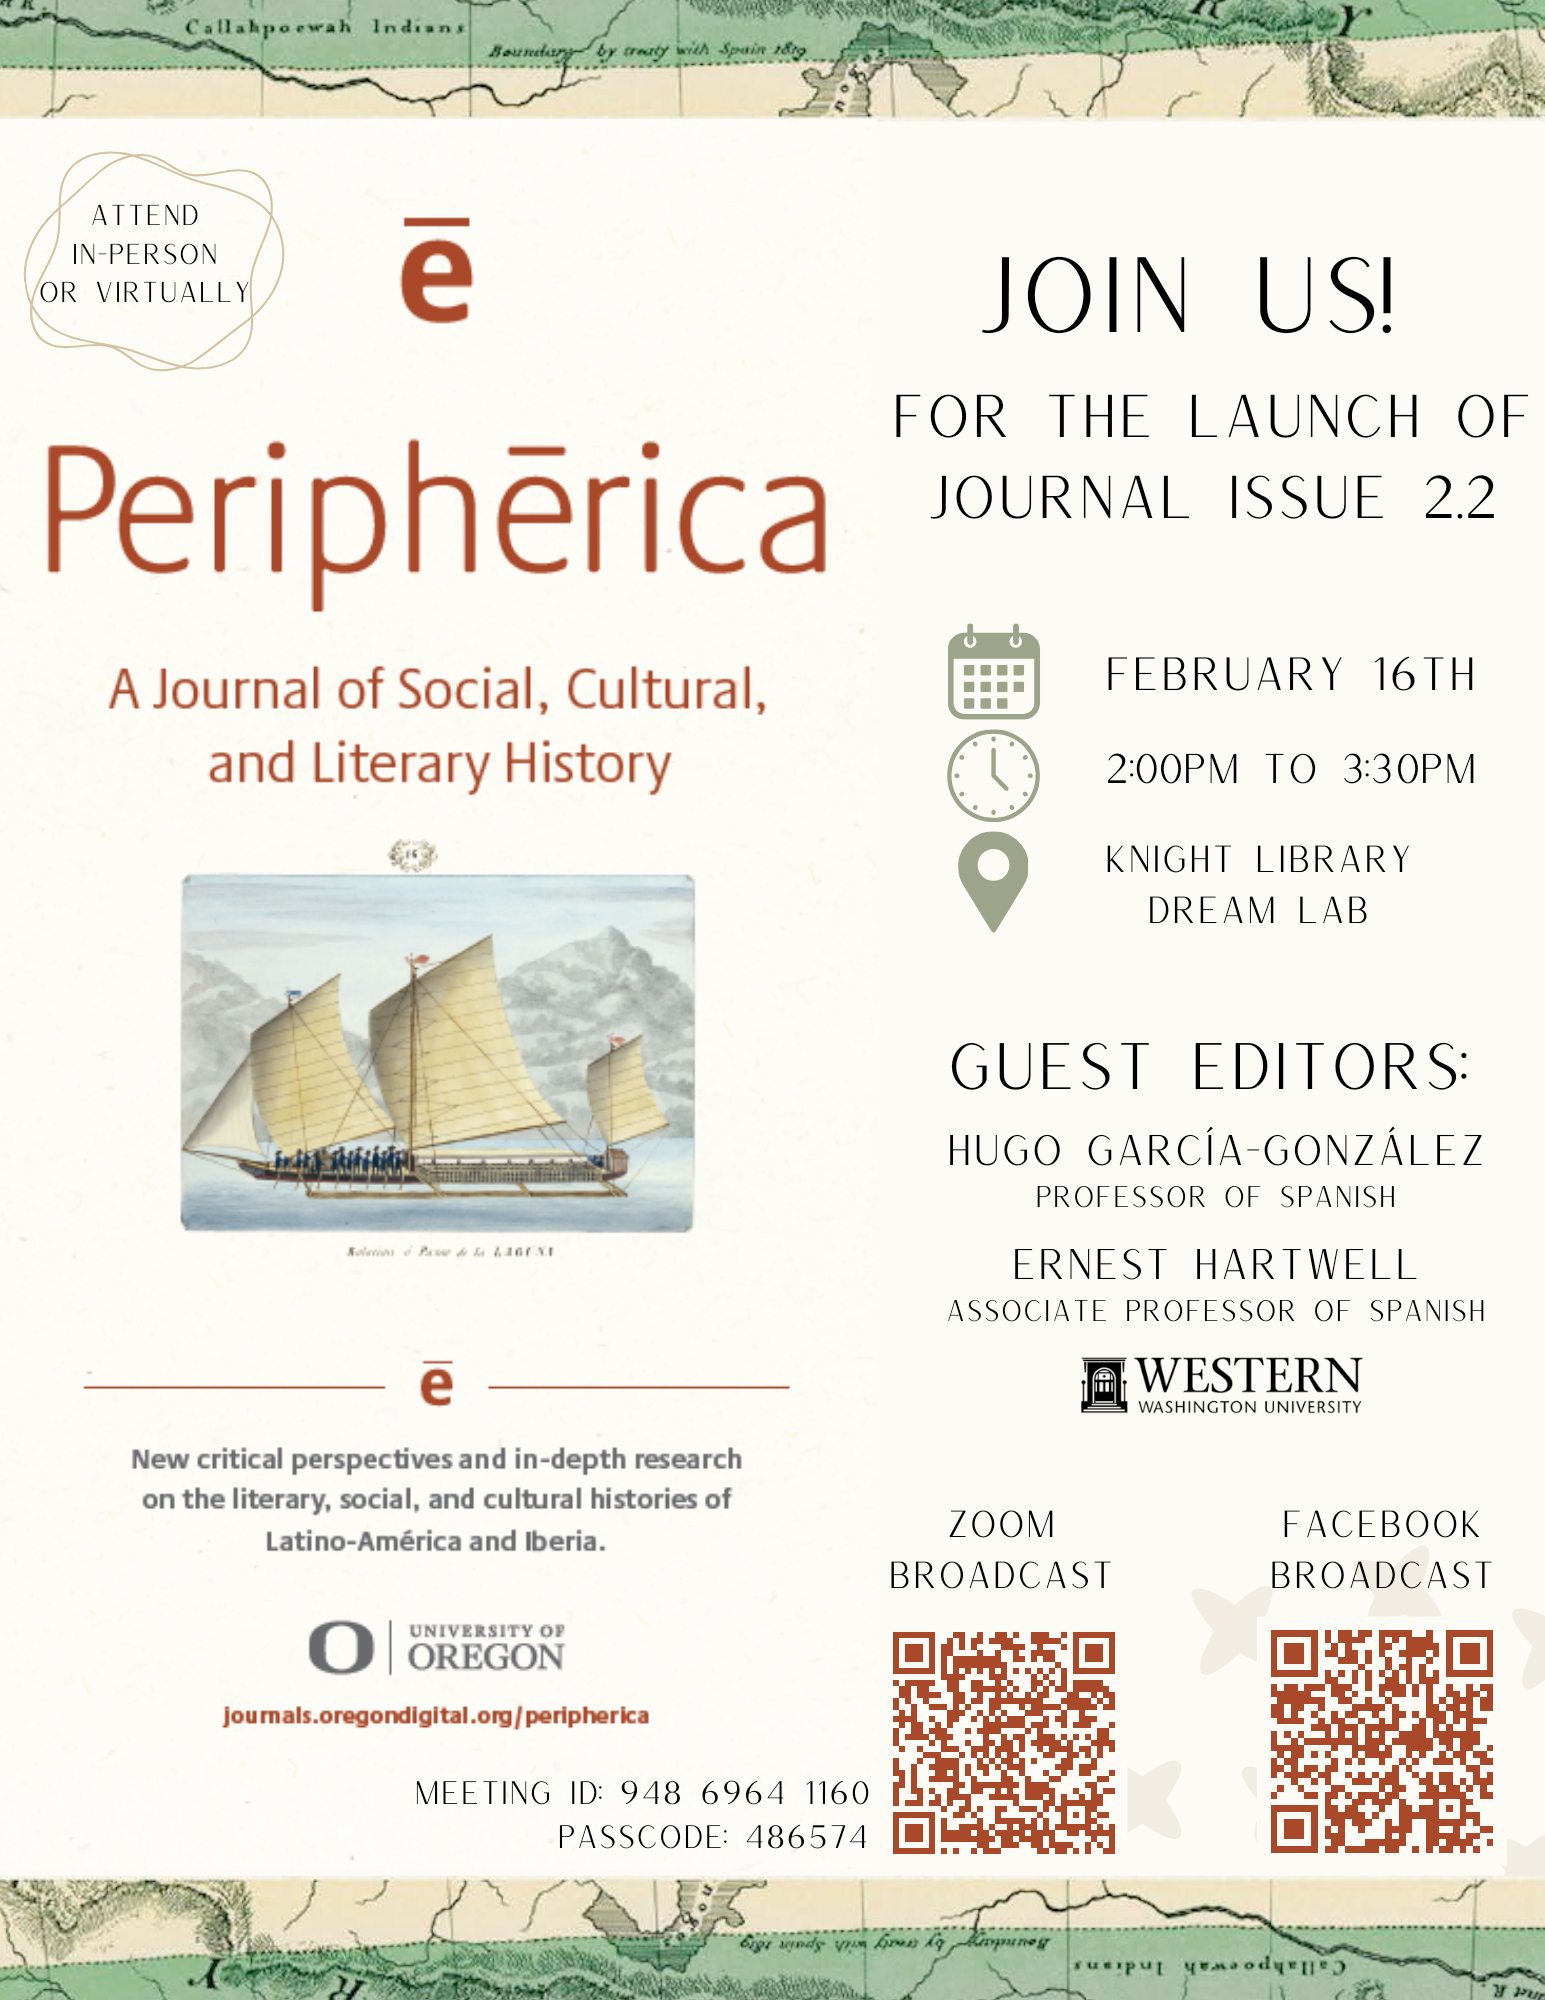 A poster advertising the launch of Peripherica Journal Issue 2.2 on Feb. 16, 2024 from 2:00 - 3:30pm. The event will be held in-person and broadcast virtually over Facebook and Zoom. OR codes are located at the bottom right of the image.